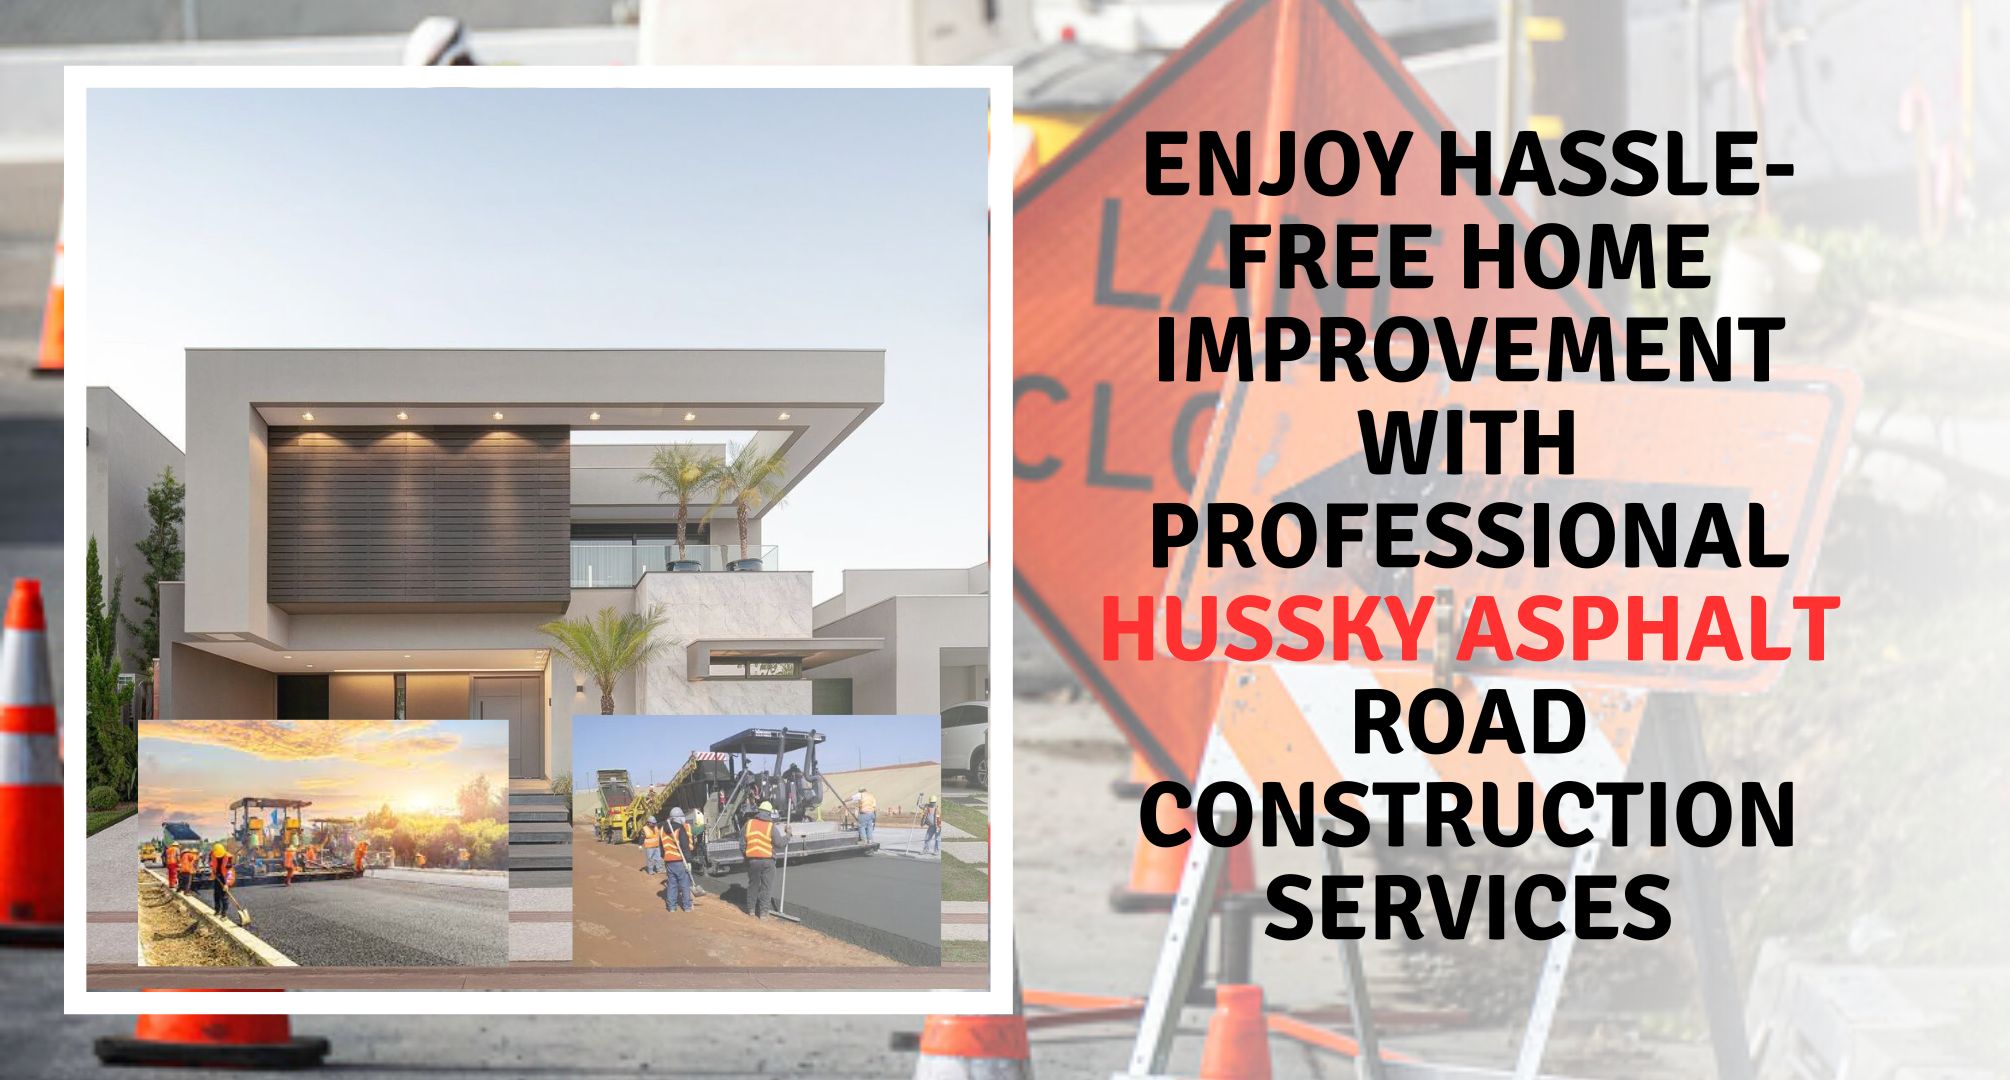 Enjoy Hassle-Free Home Improvement with Professional Hussky Asphalt Road Construction Services